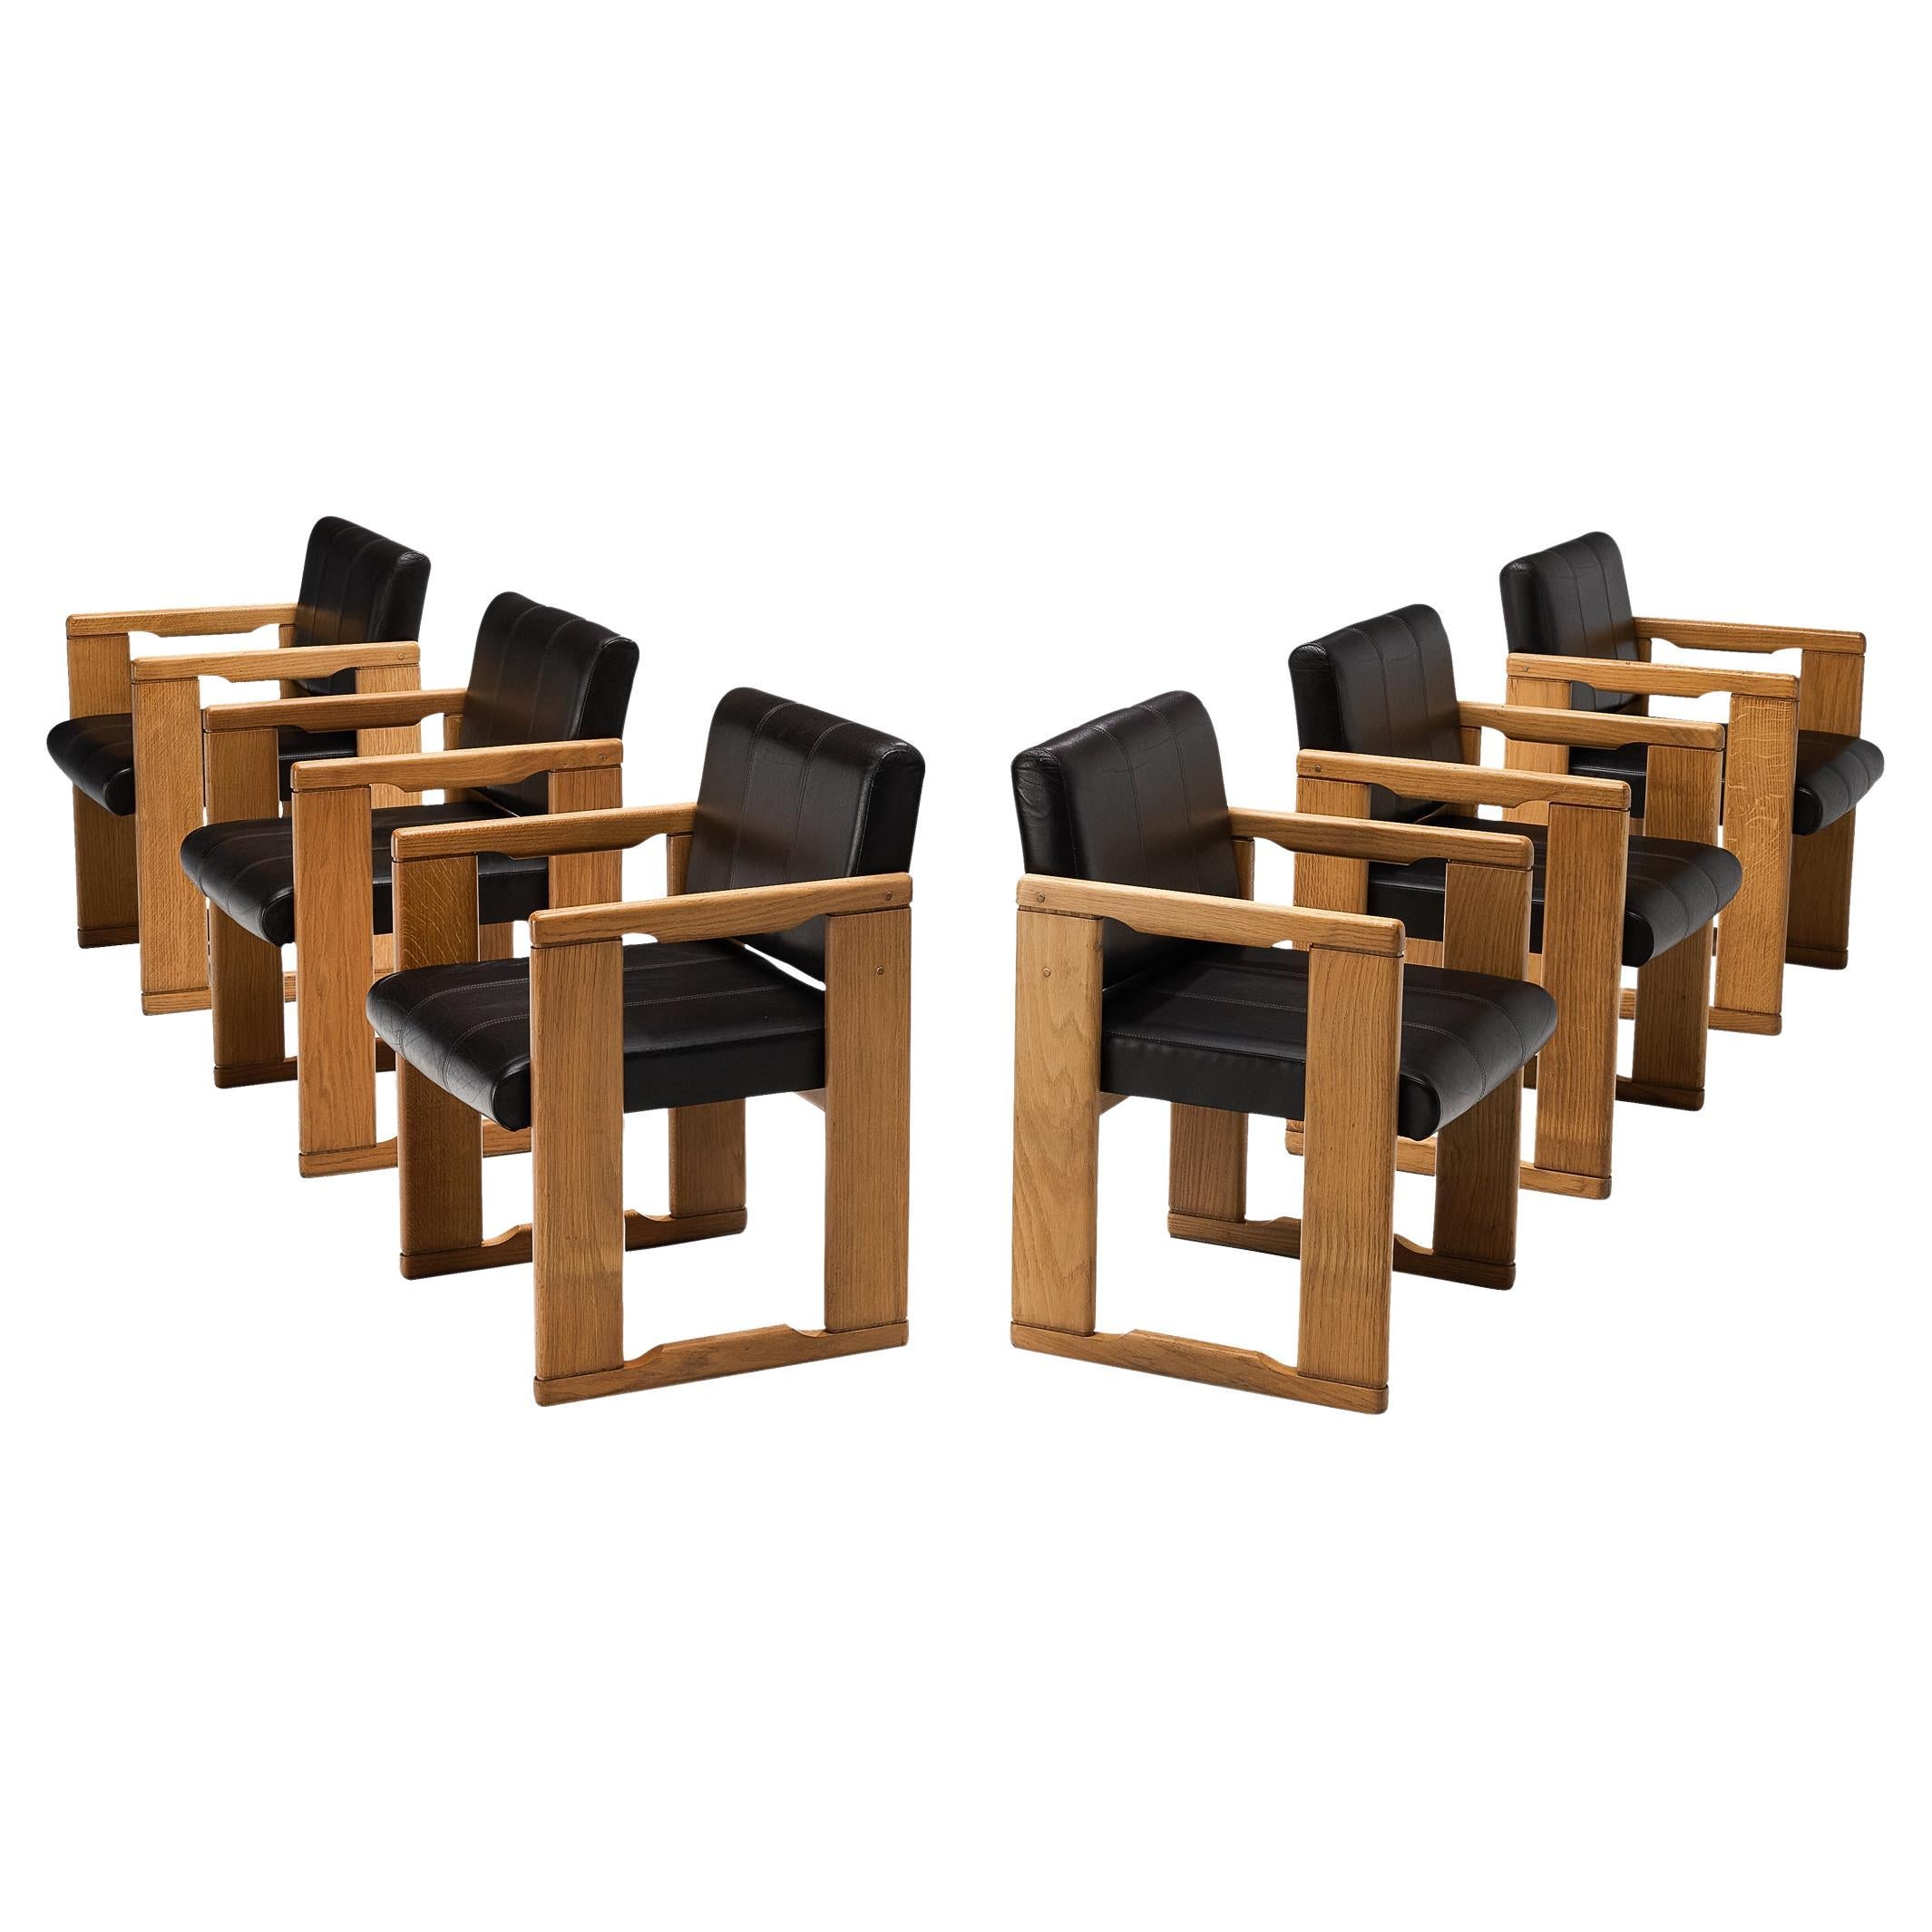 Italian Set of Six Dining Chairs in Oak and Leather